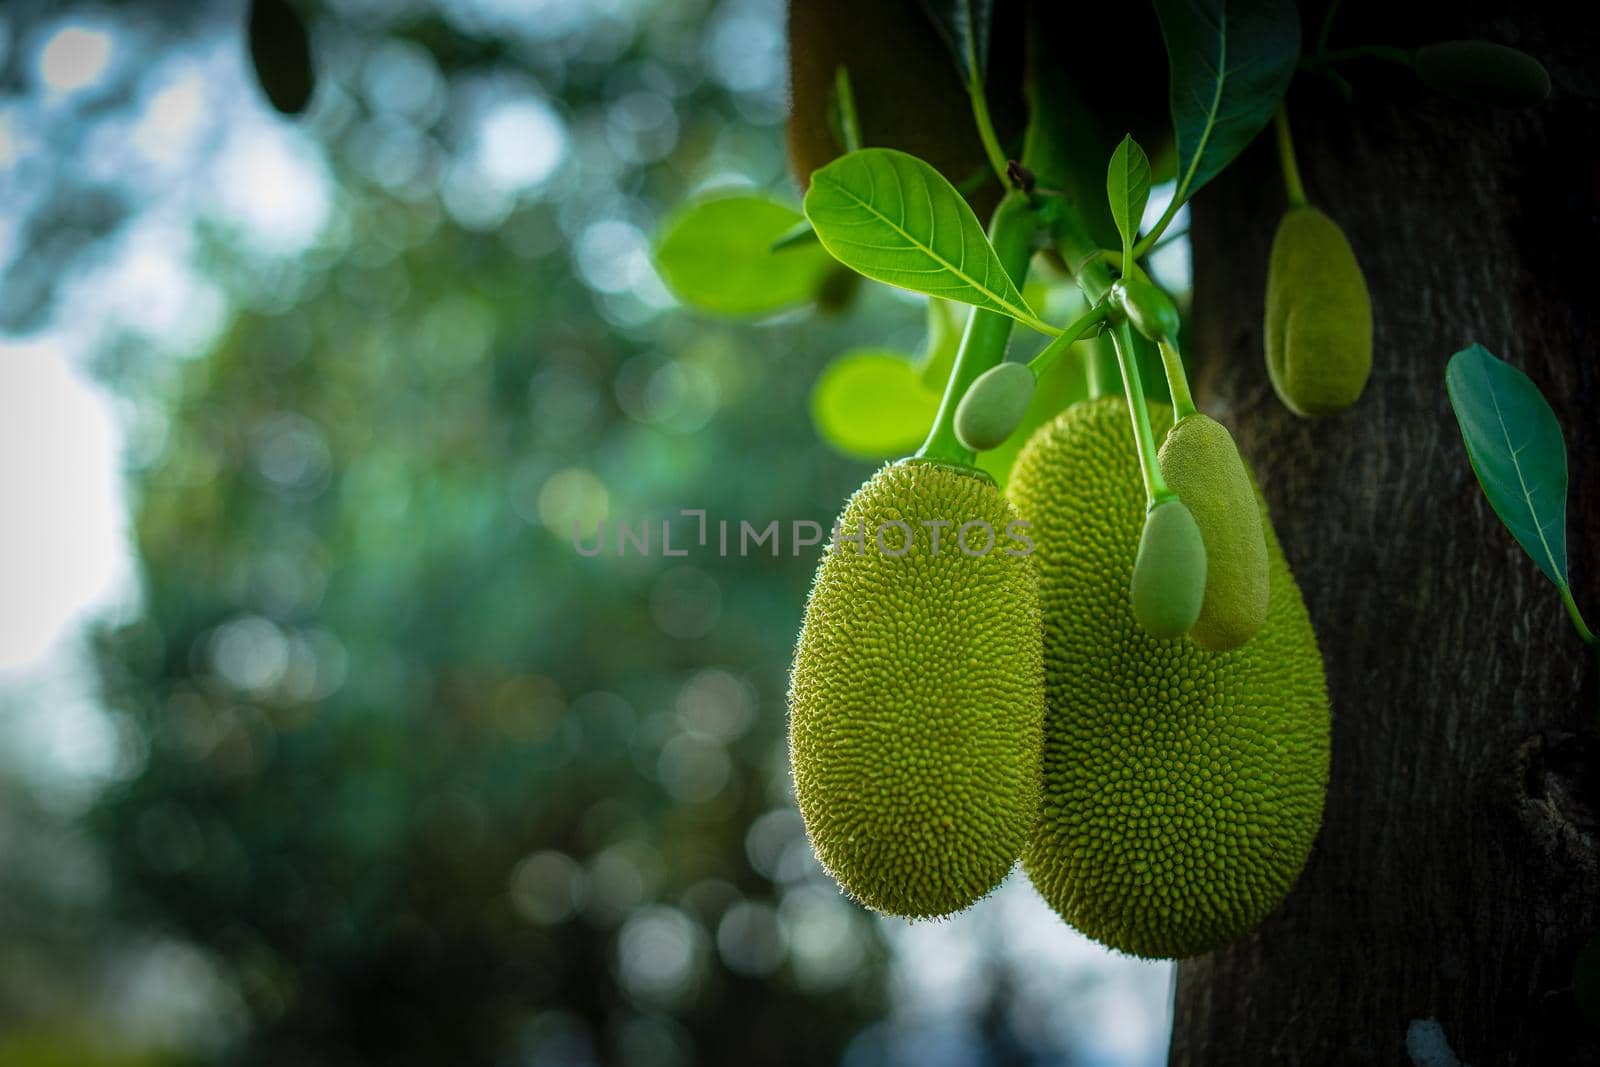 Jack fruits hanging on trees in a garden by domonite